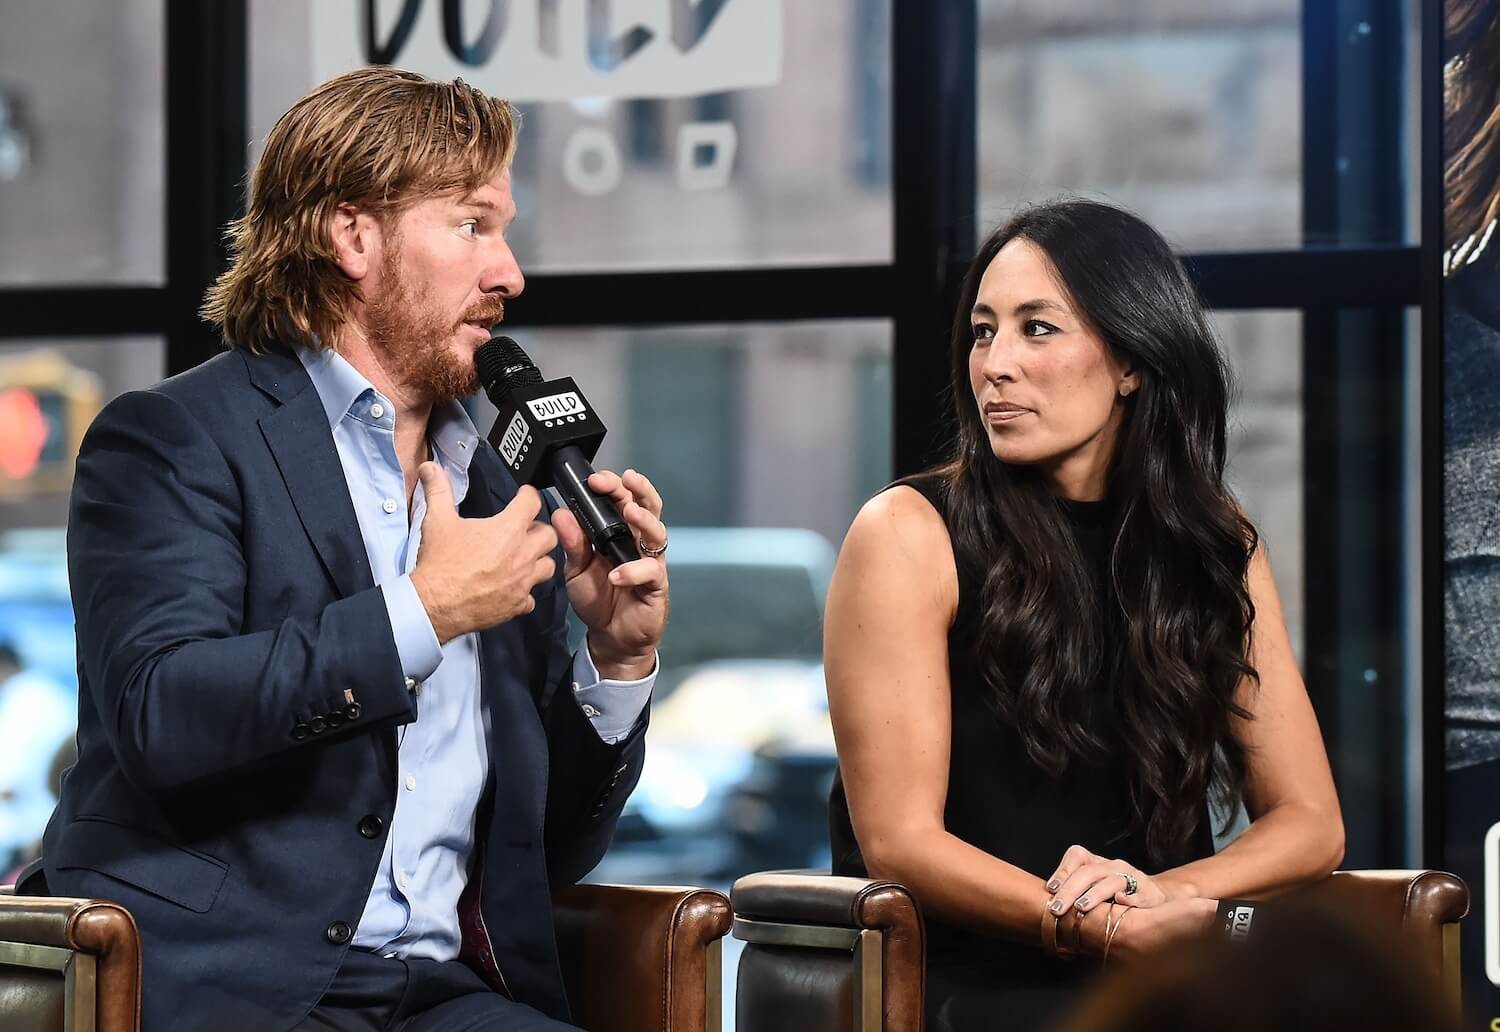 Chip Gaines and Joanna Gaines from 'Fixer Upper' sitting next to each other in an interview